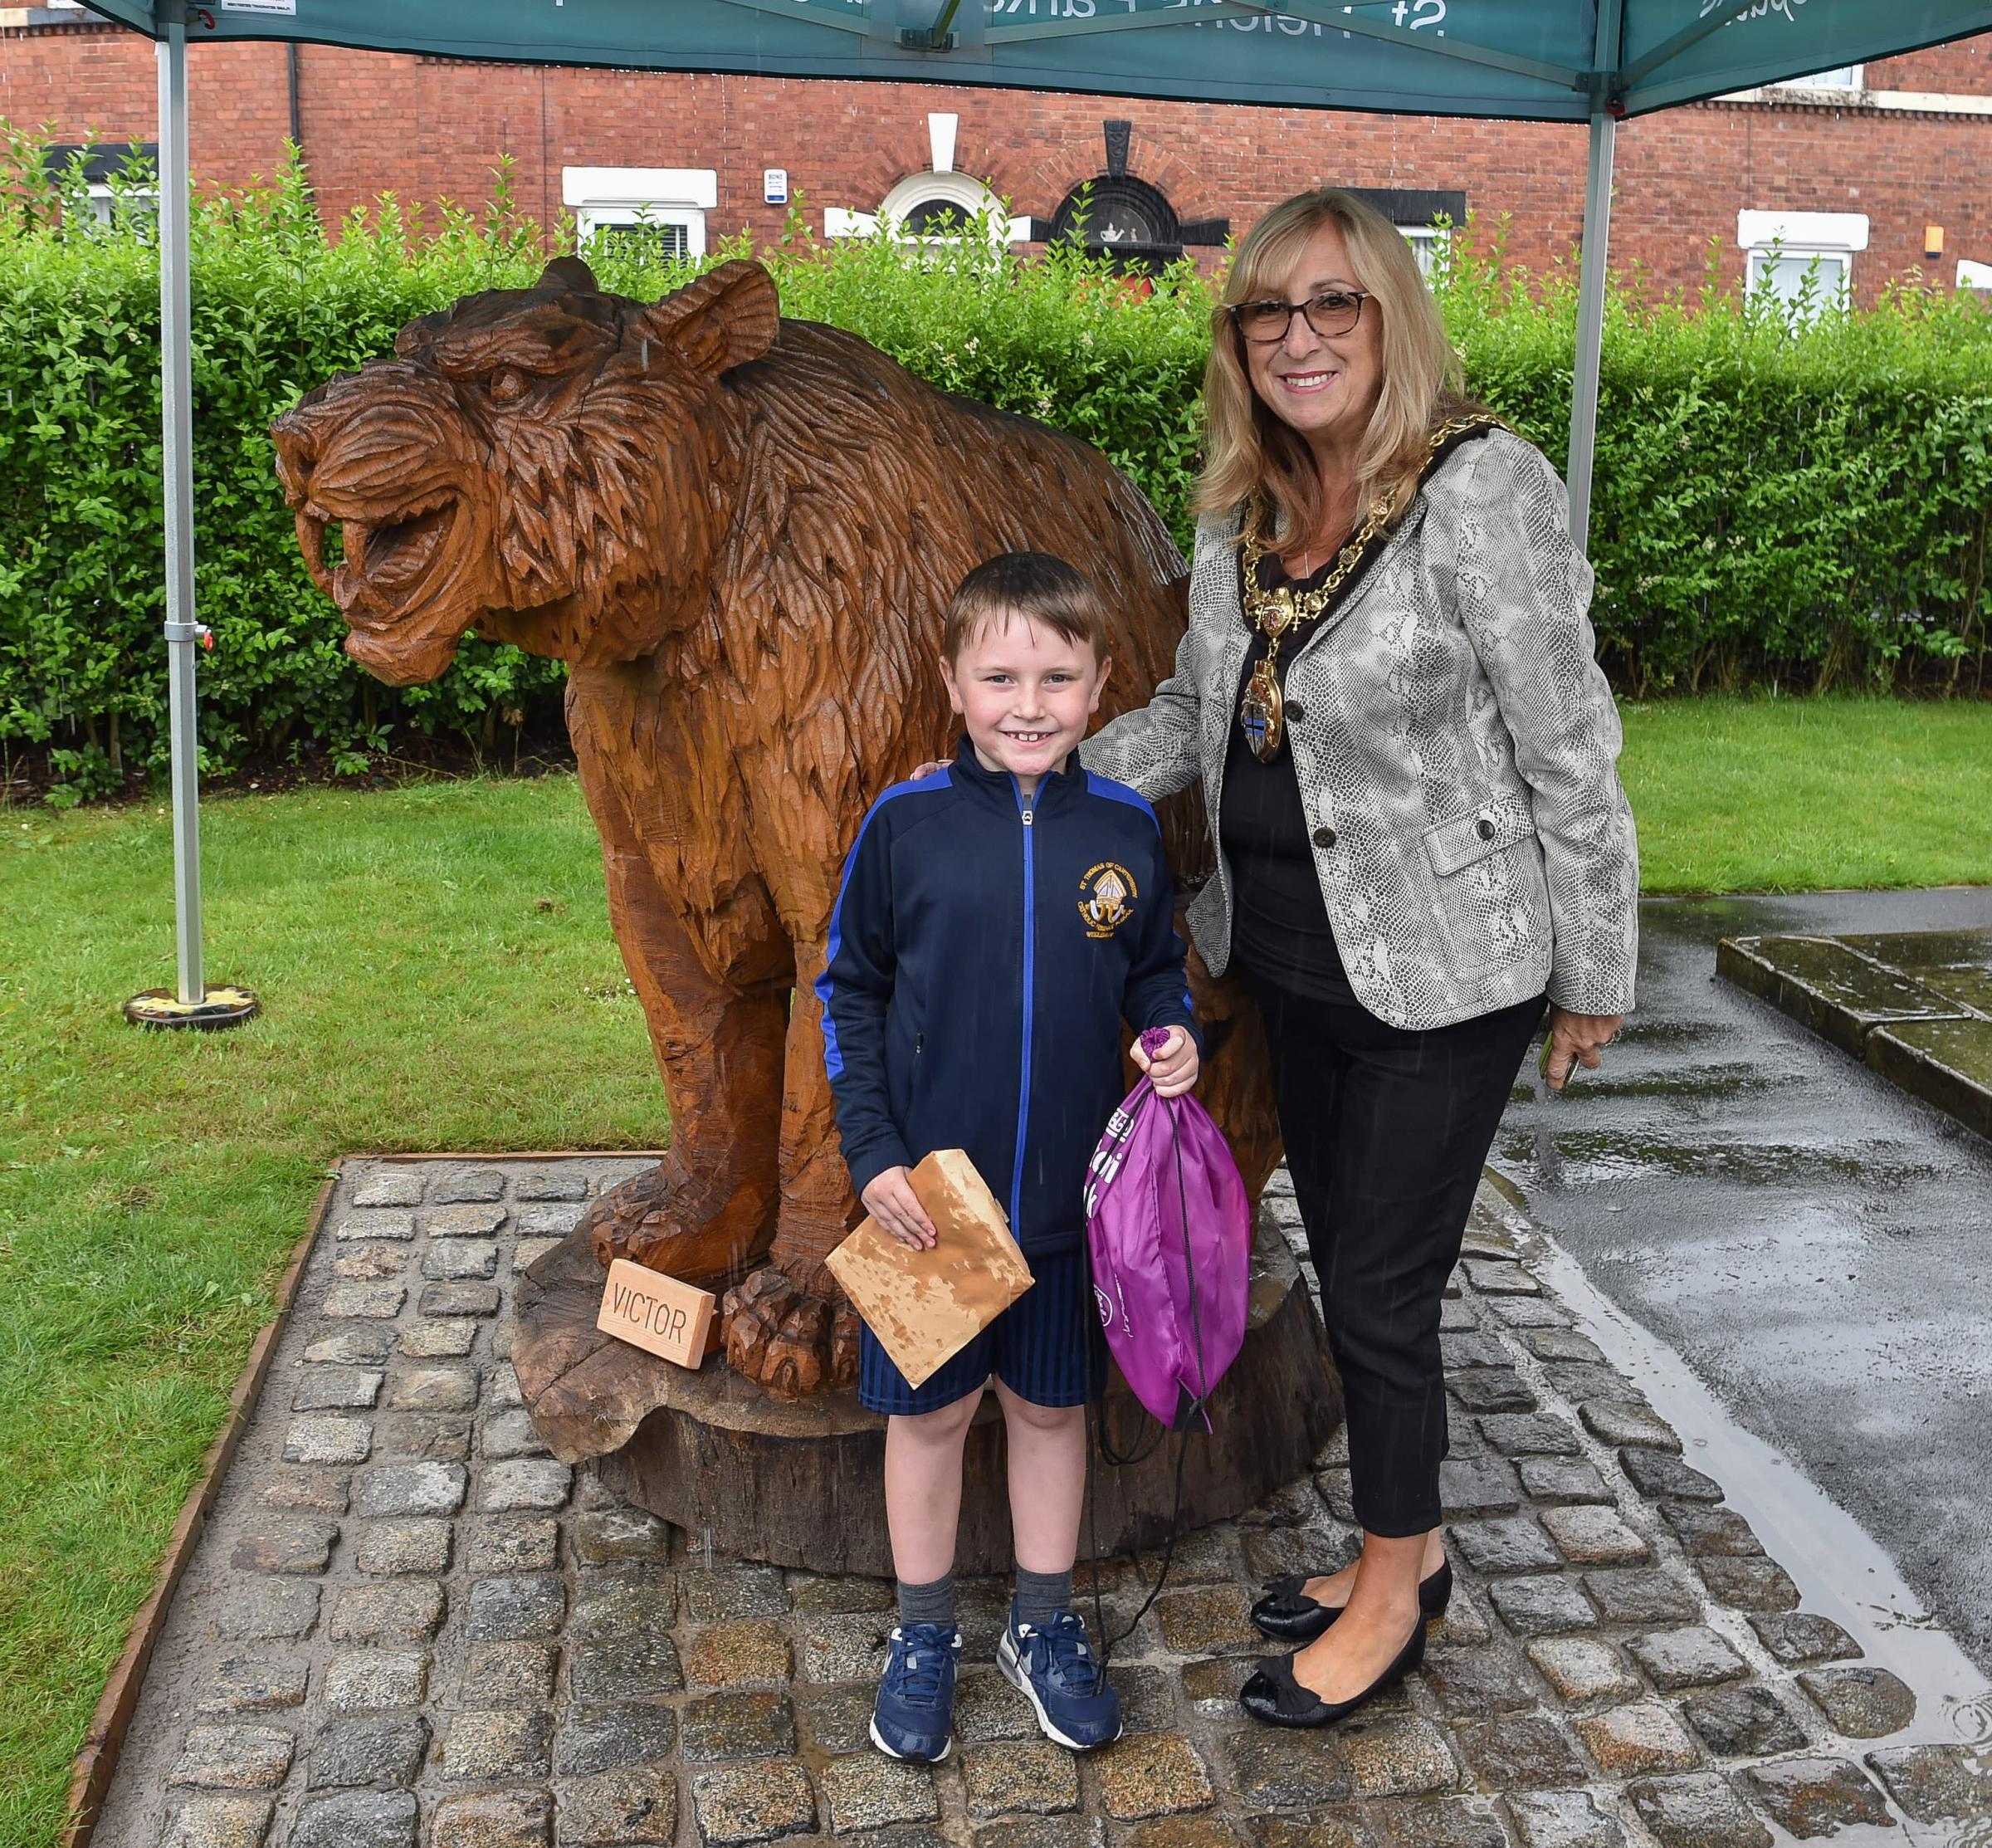 The winning nomination was proposed by Year 1 pupil Ruari Cross, who is pictured with Mayor of St Helens Sue Murphy